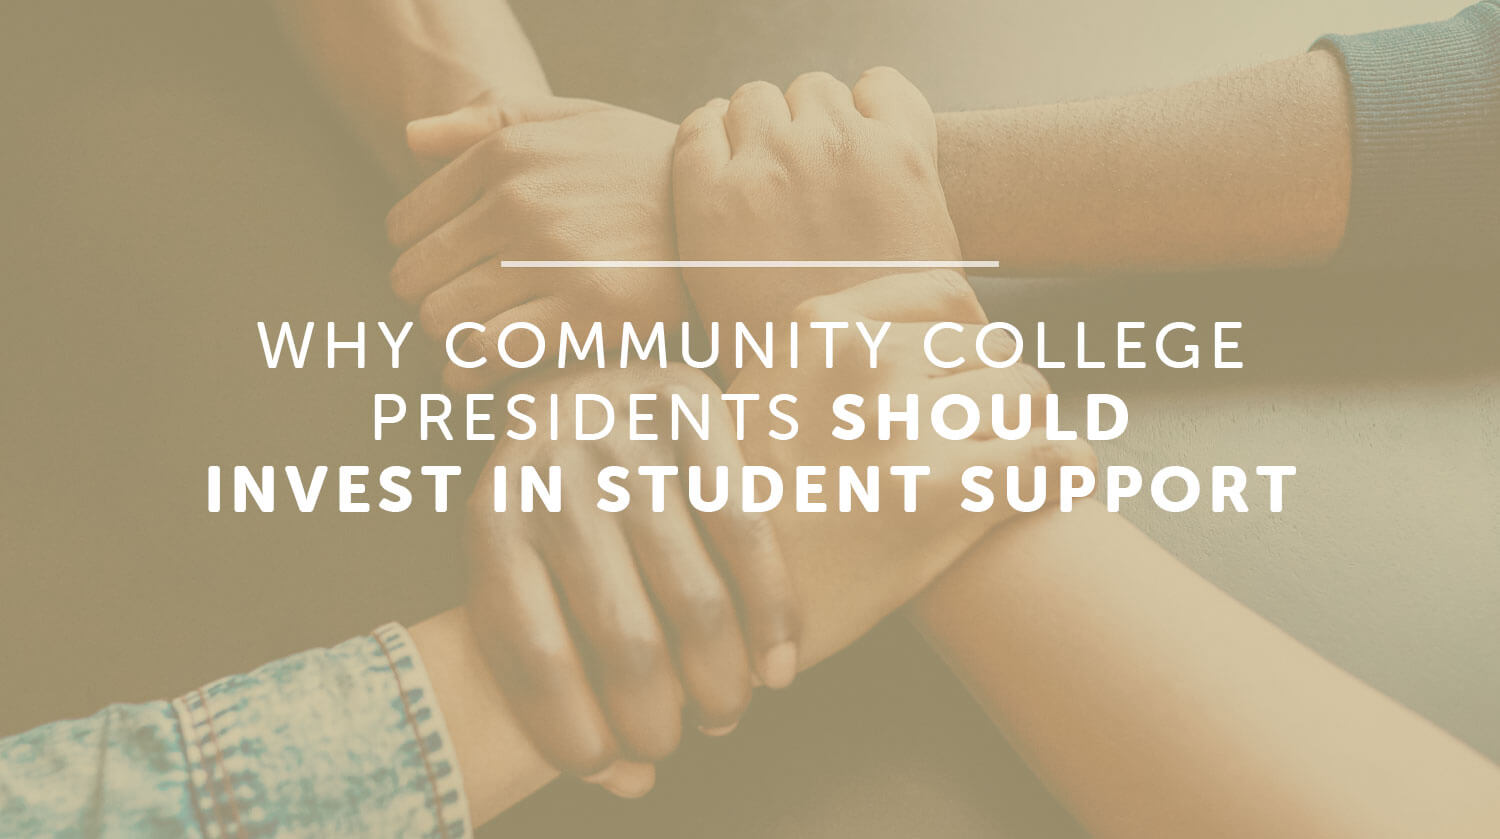 Why Community College Presidents Should Invest in Student Support